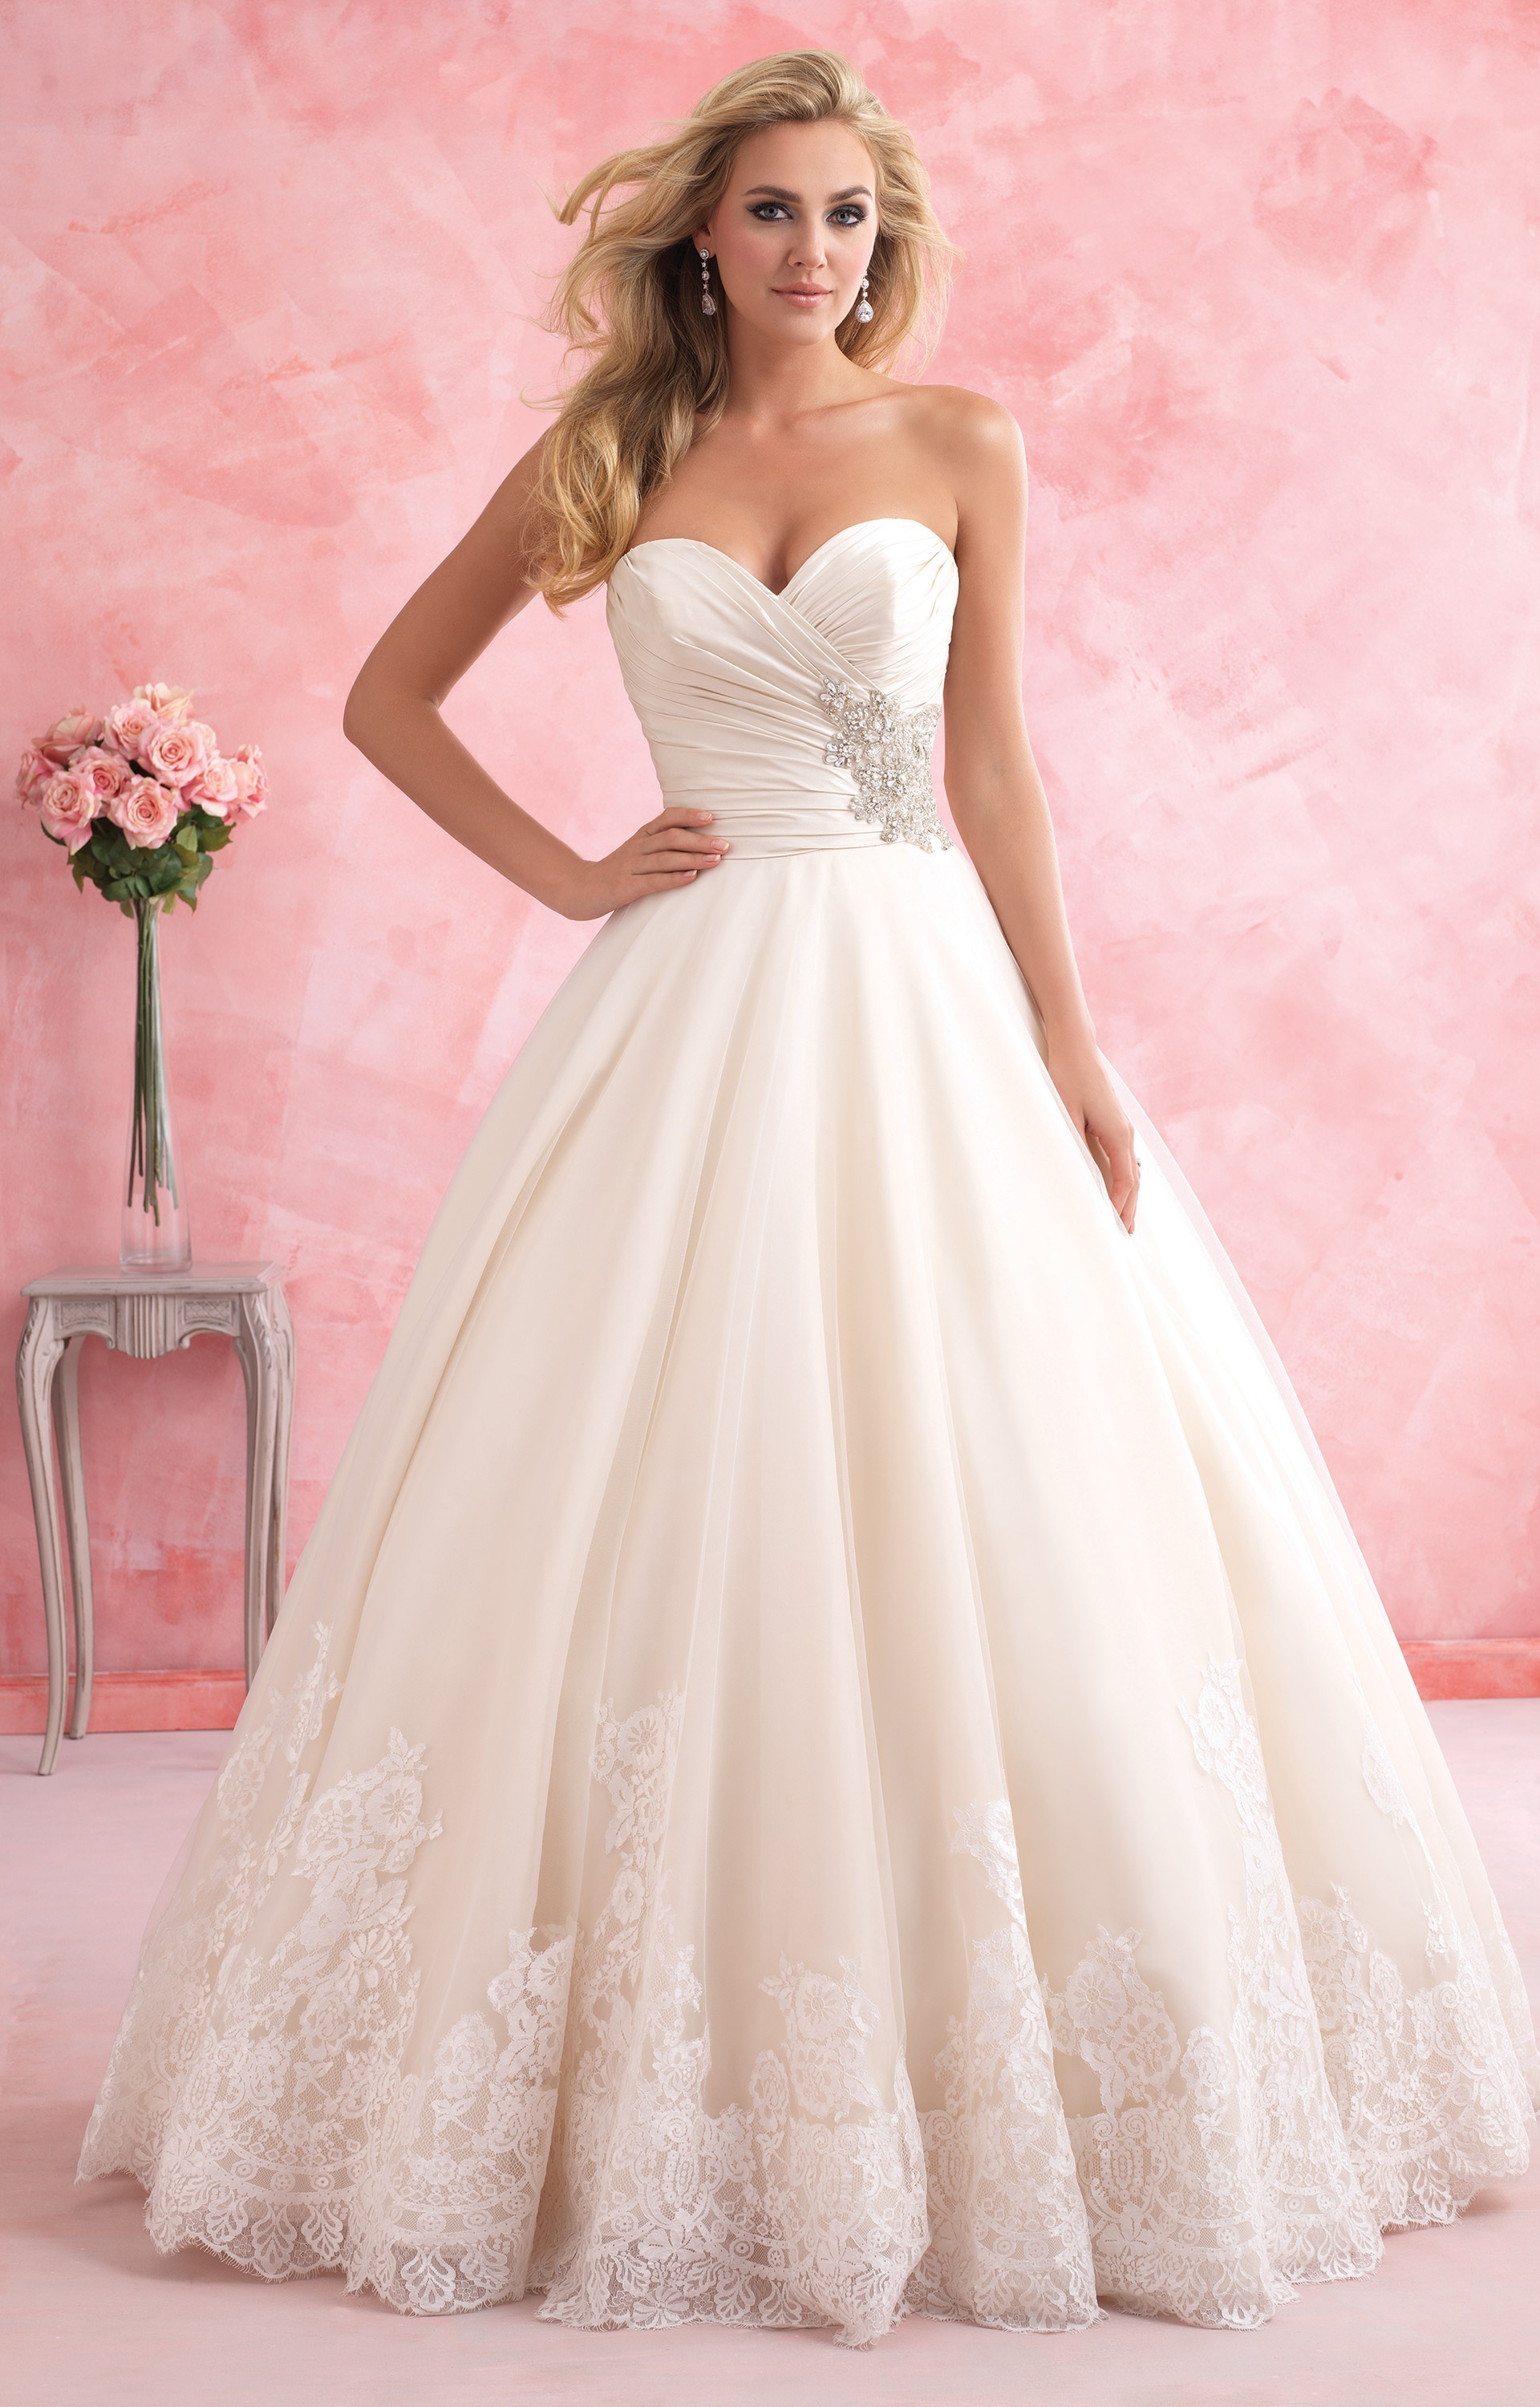 20 Ball Gown Wedding Dresses - Wedding Gowns & Big Hips - MagMent